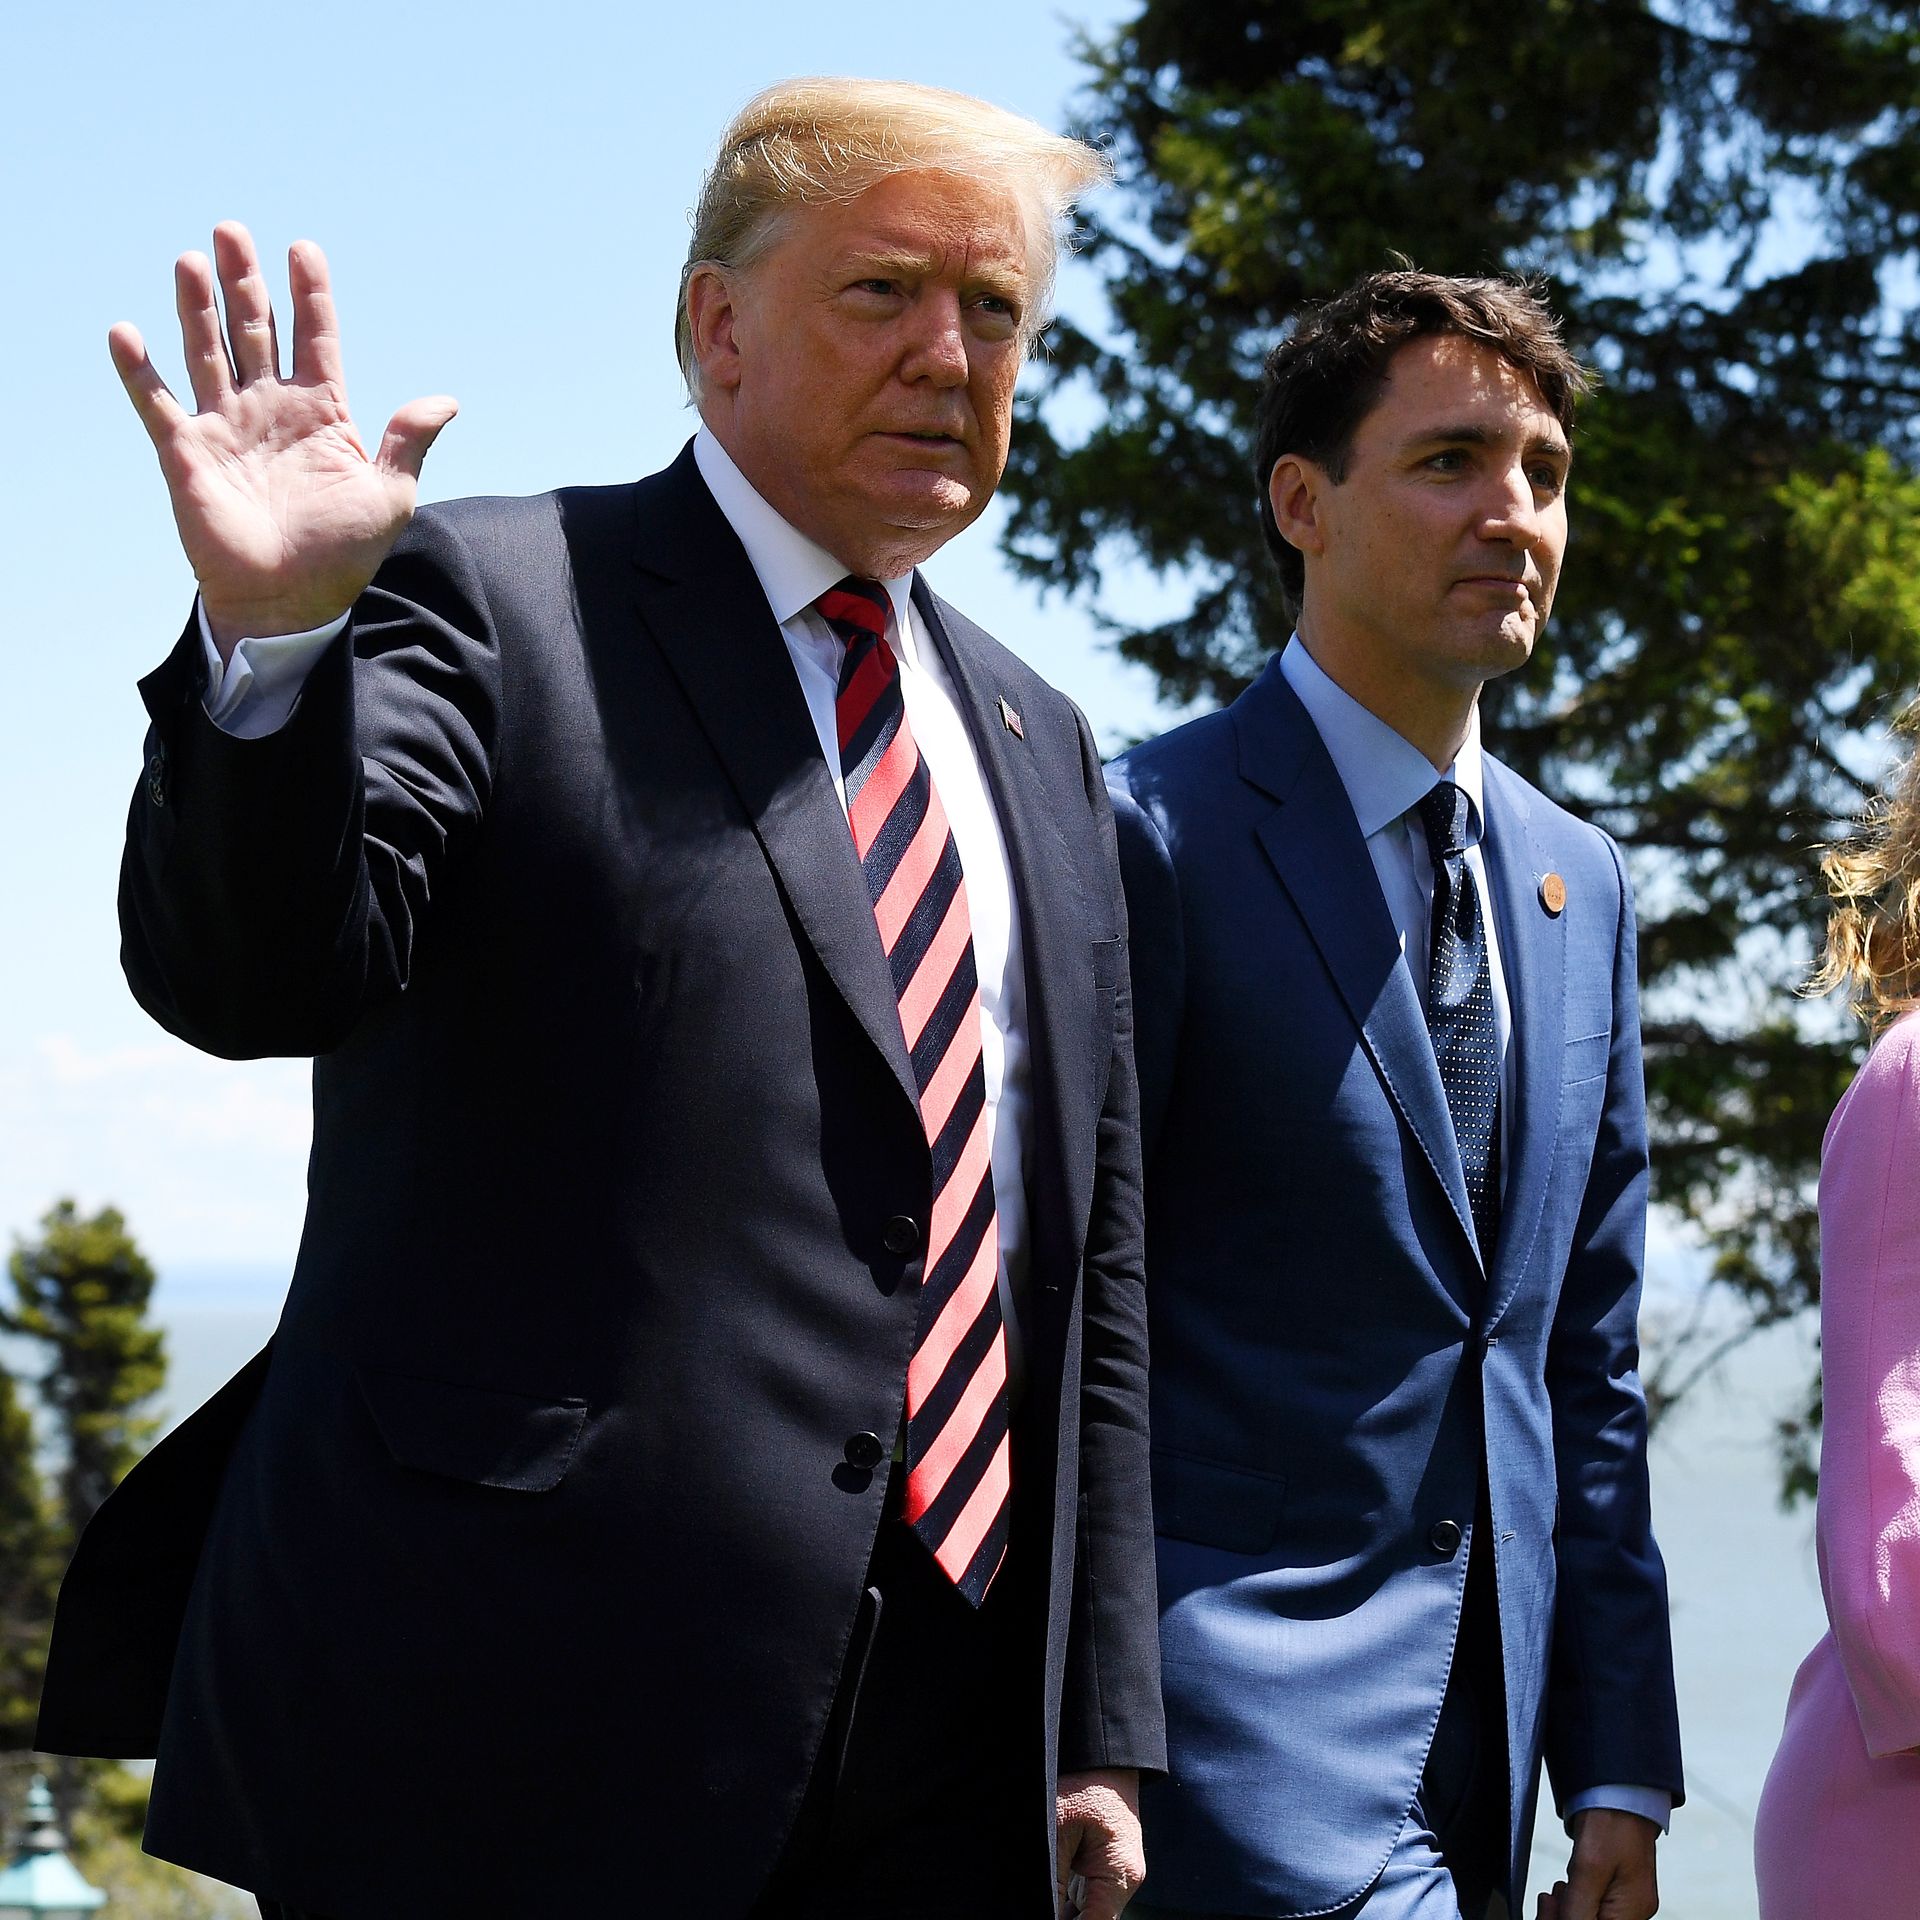 Prime Minister of Canada Justin Trudeau and wife Sophie Gregoire greet President Trump during the G7 official welcome on June 8, 2018 in Quebec City. 